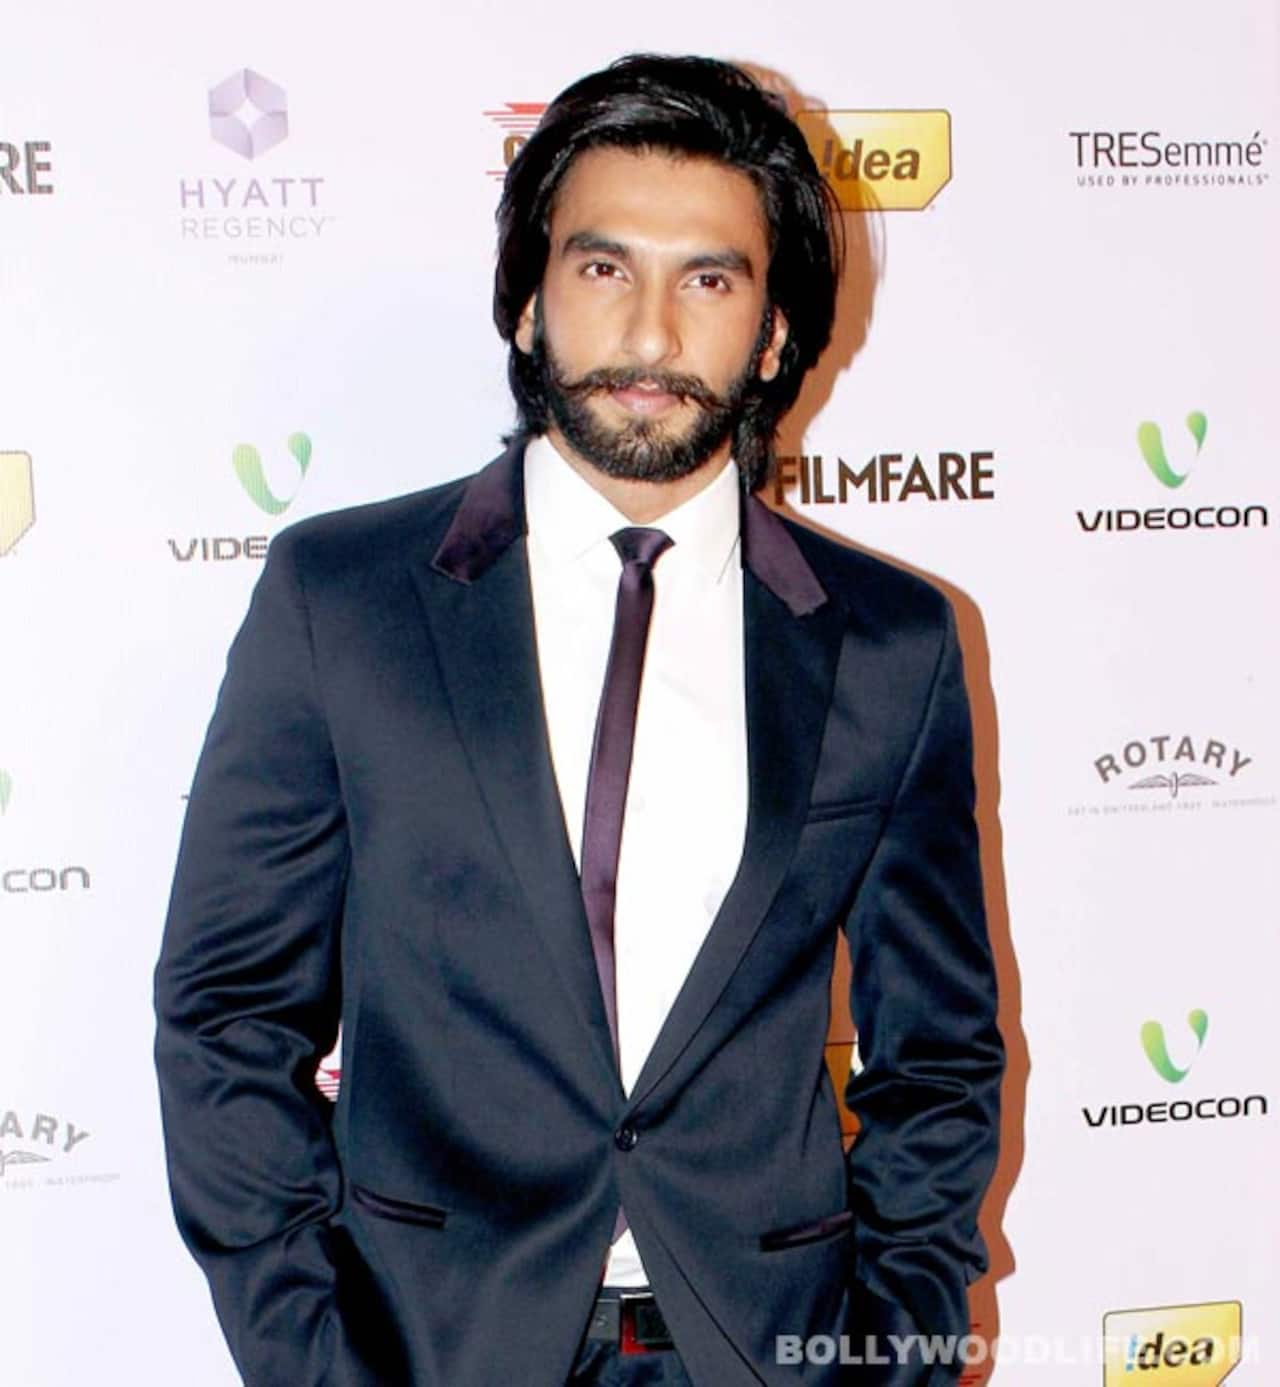 Ranveer Singh Wants More Than To Be A Sex Object Bollywood News And Gossip Movie Reviews